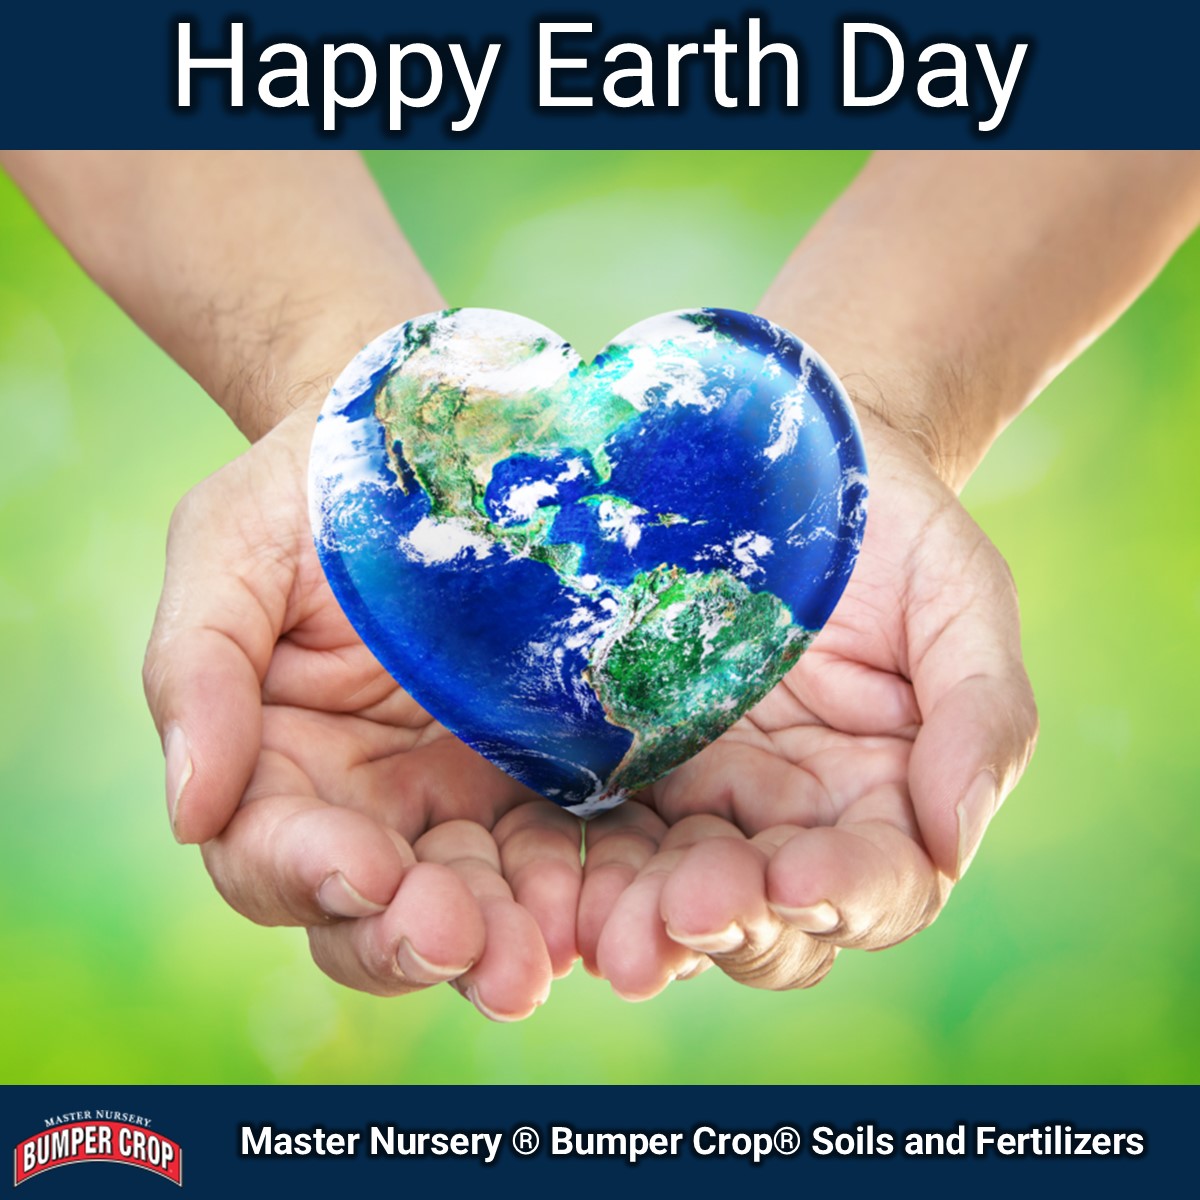 🌎 Happy Earth Day from your friends at Master Nursery® Bumper Crop®. #MasterNursery #BumperCrop #EarthDay #EarthDay2024 #April22nd #OrganicGardening #NationalGardeningMonth #KidsGardeningMonth BumperCrop.com